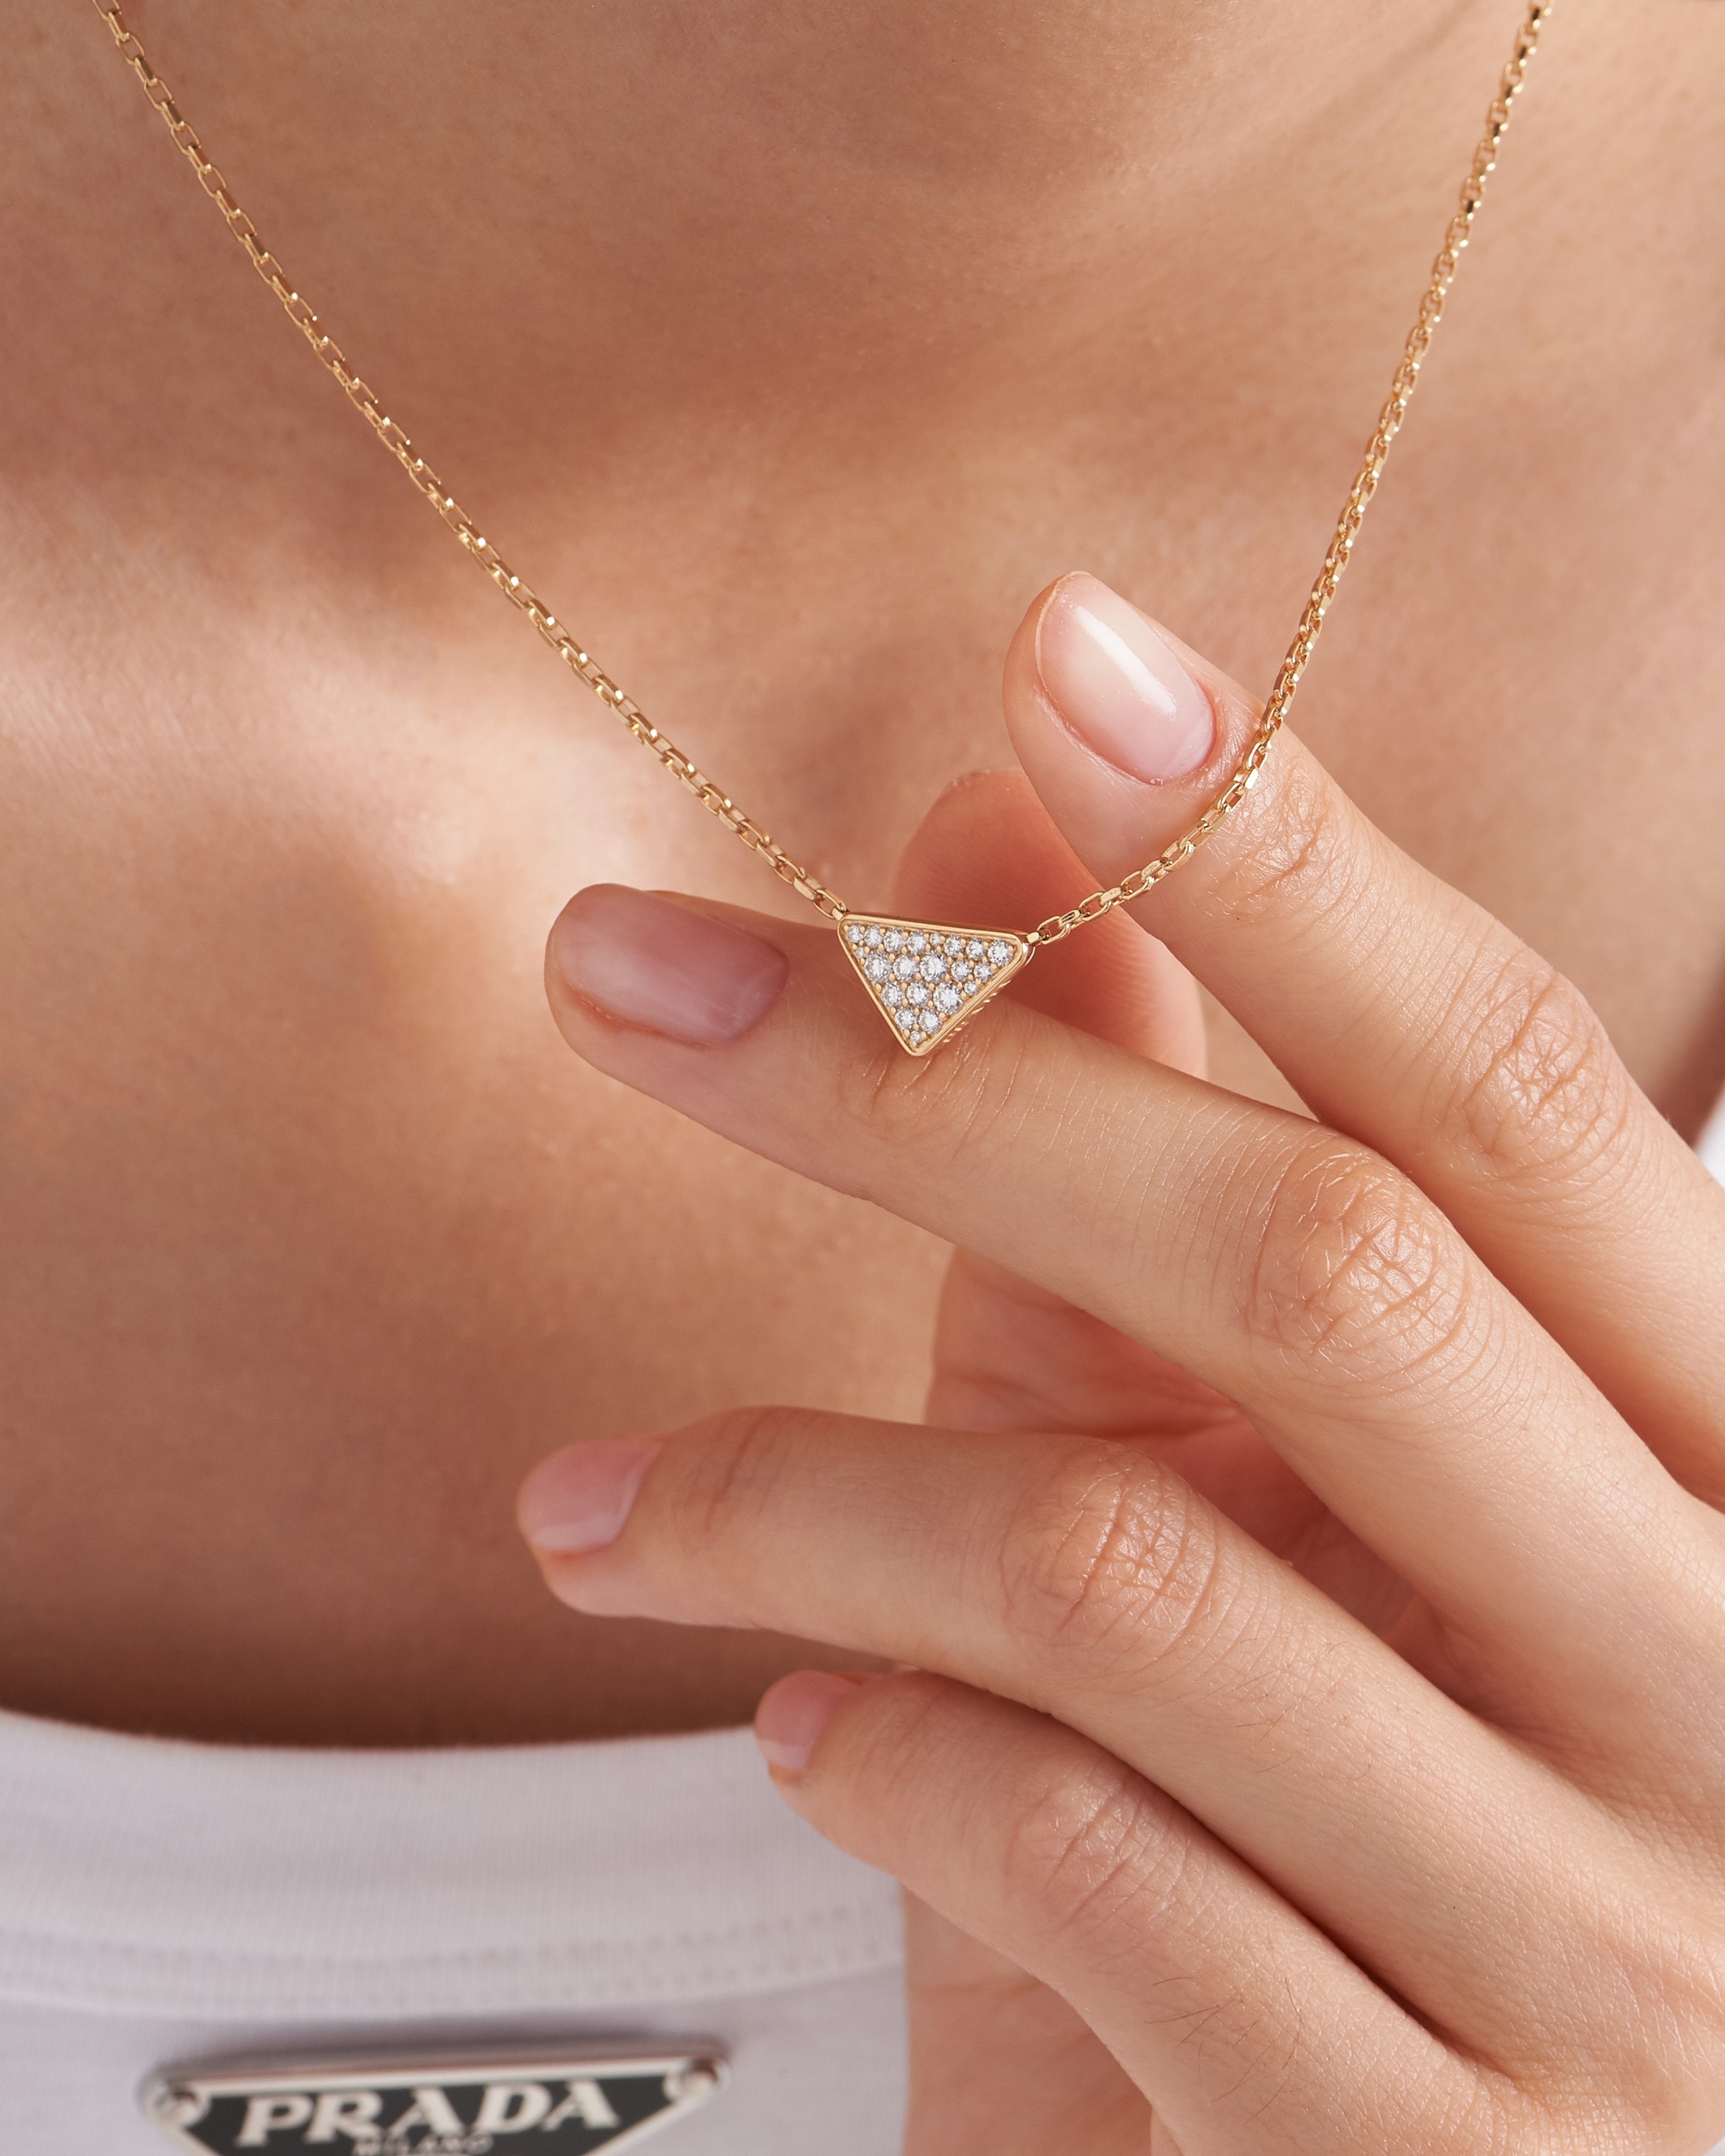 Eternal Gold micro triangle pendant necklace in yellow gold and diamonds - 4